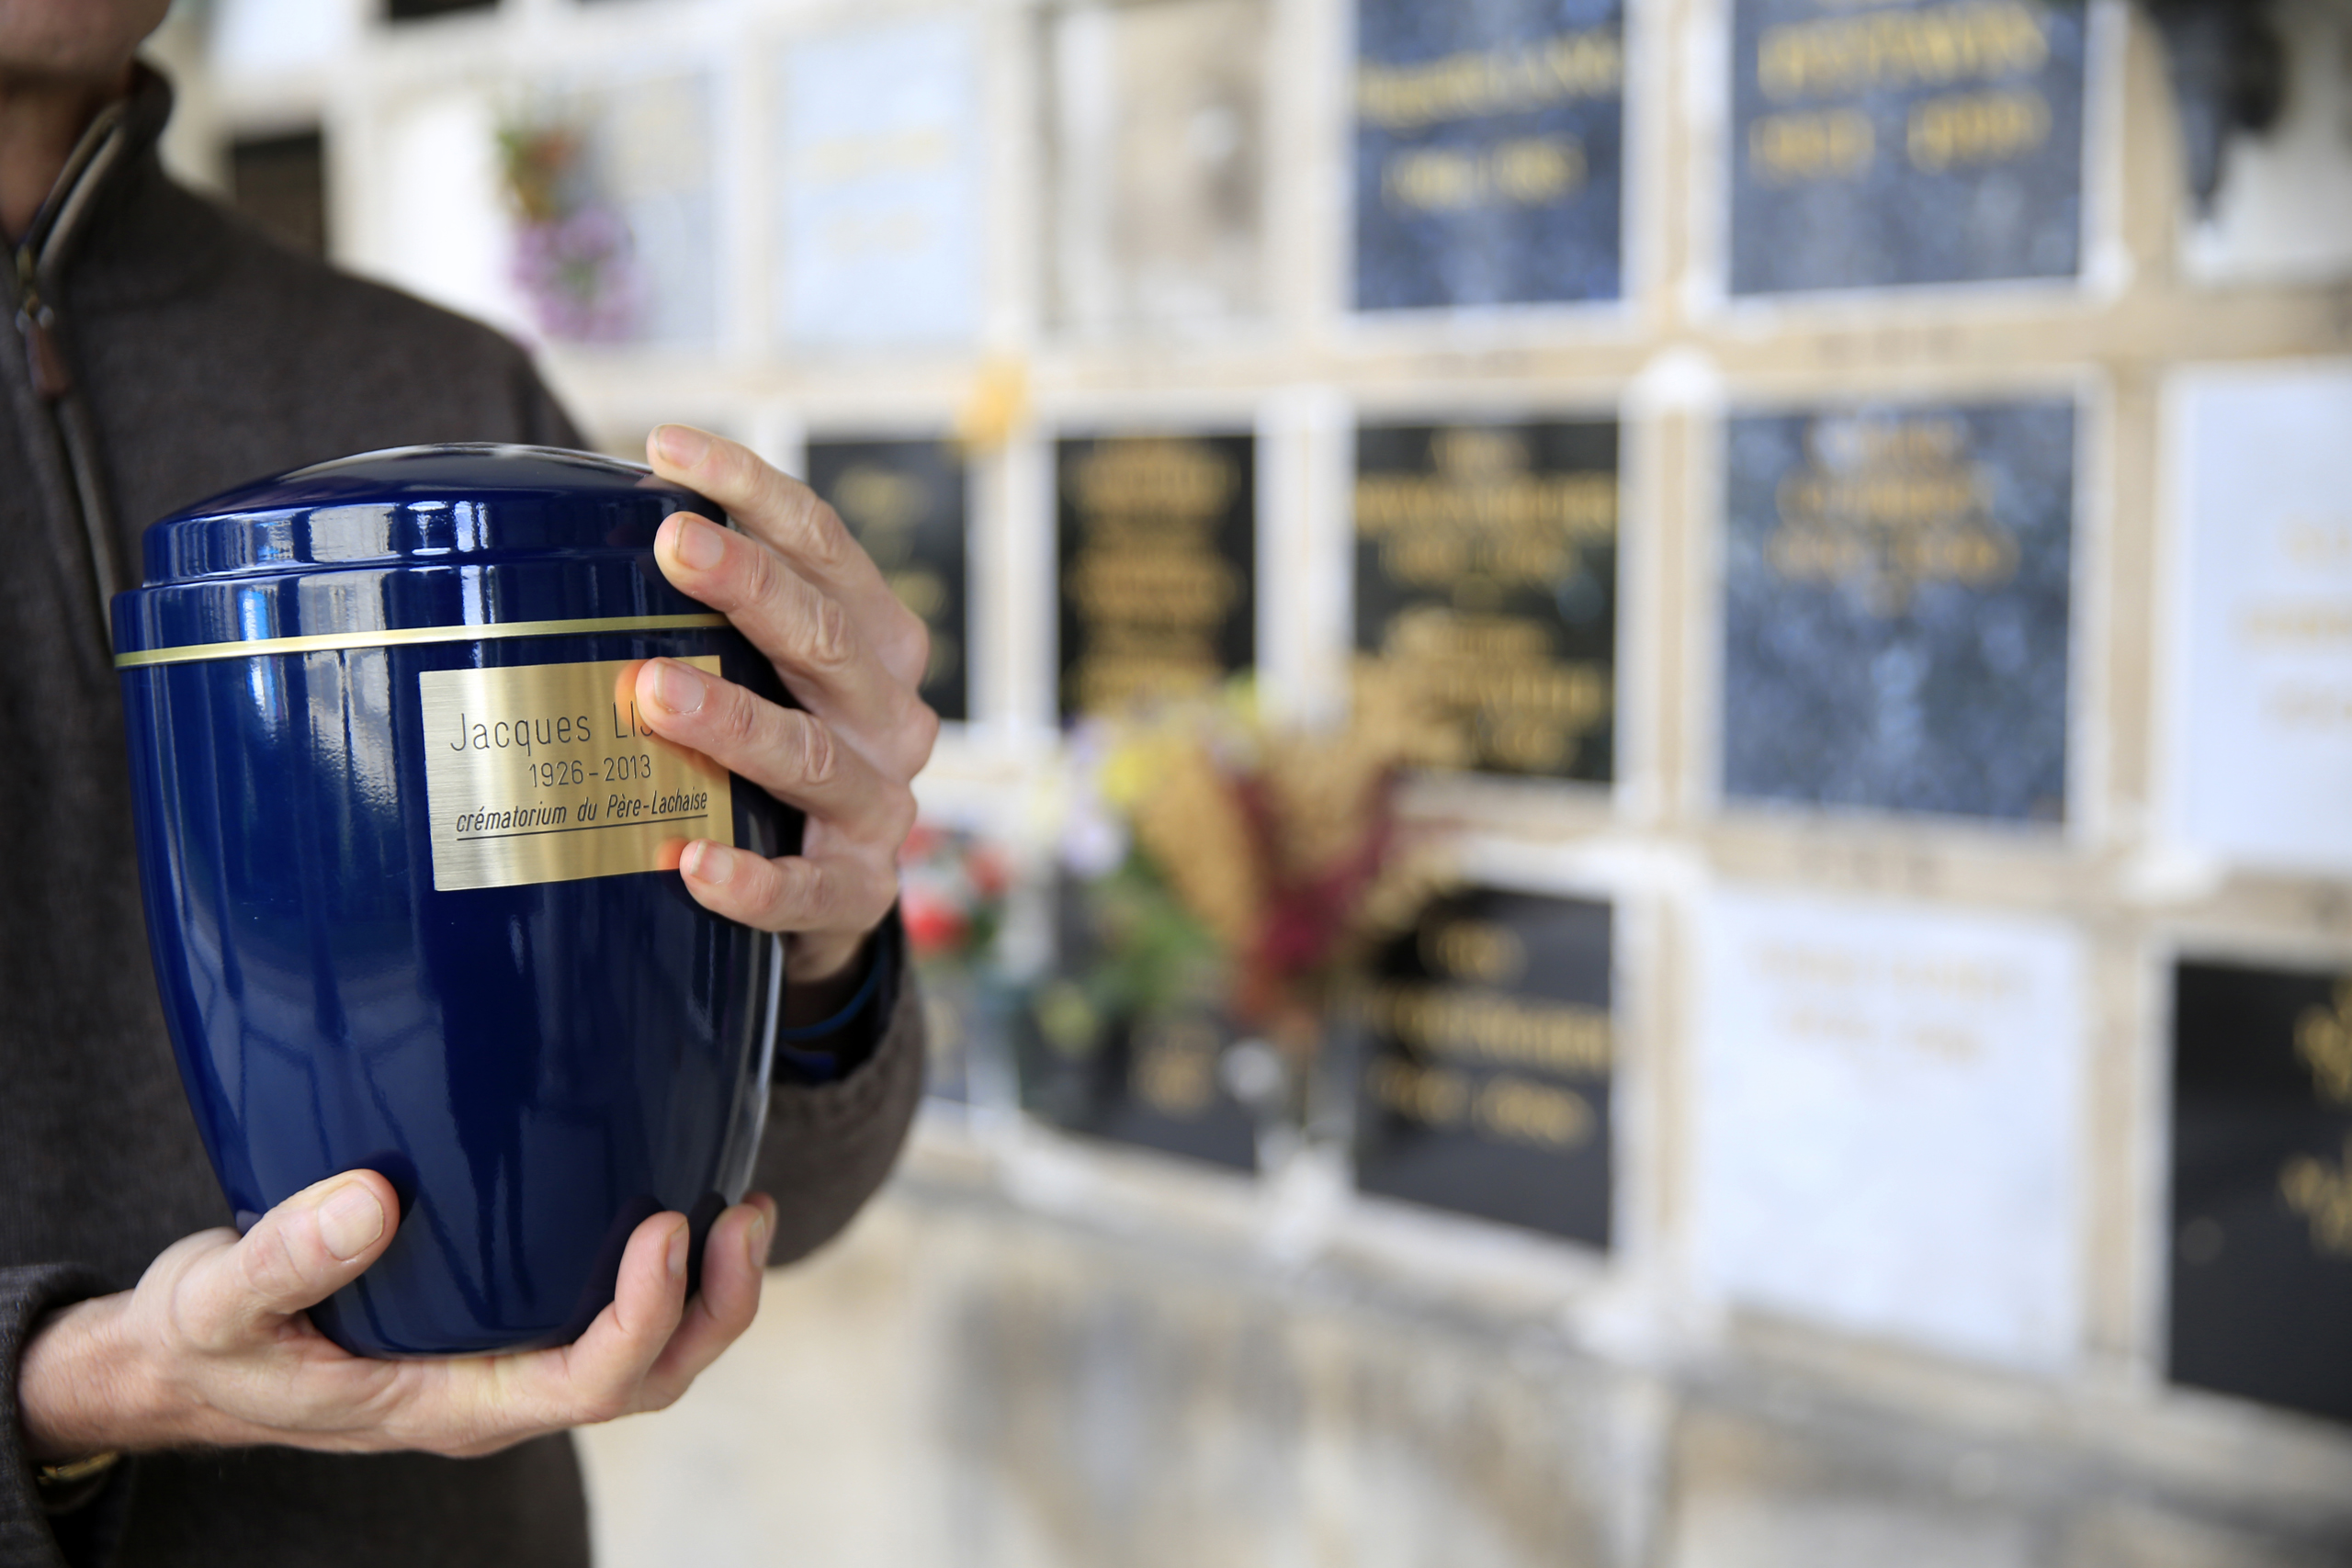 Cremation outpaced traditional burial in the U.S. for the first time in 2015. Here, a cremation urn is shown. (Godong—Getty Images)